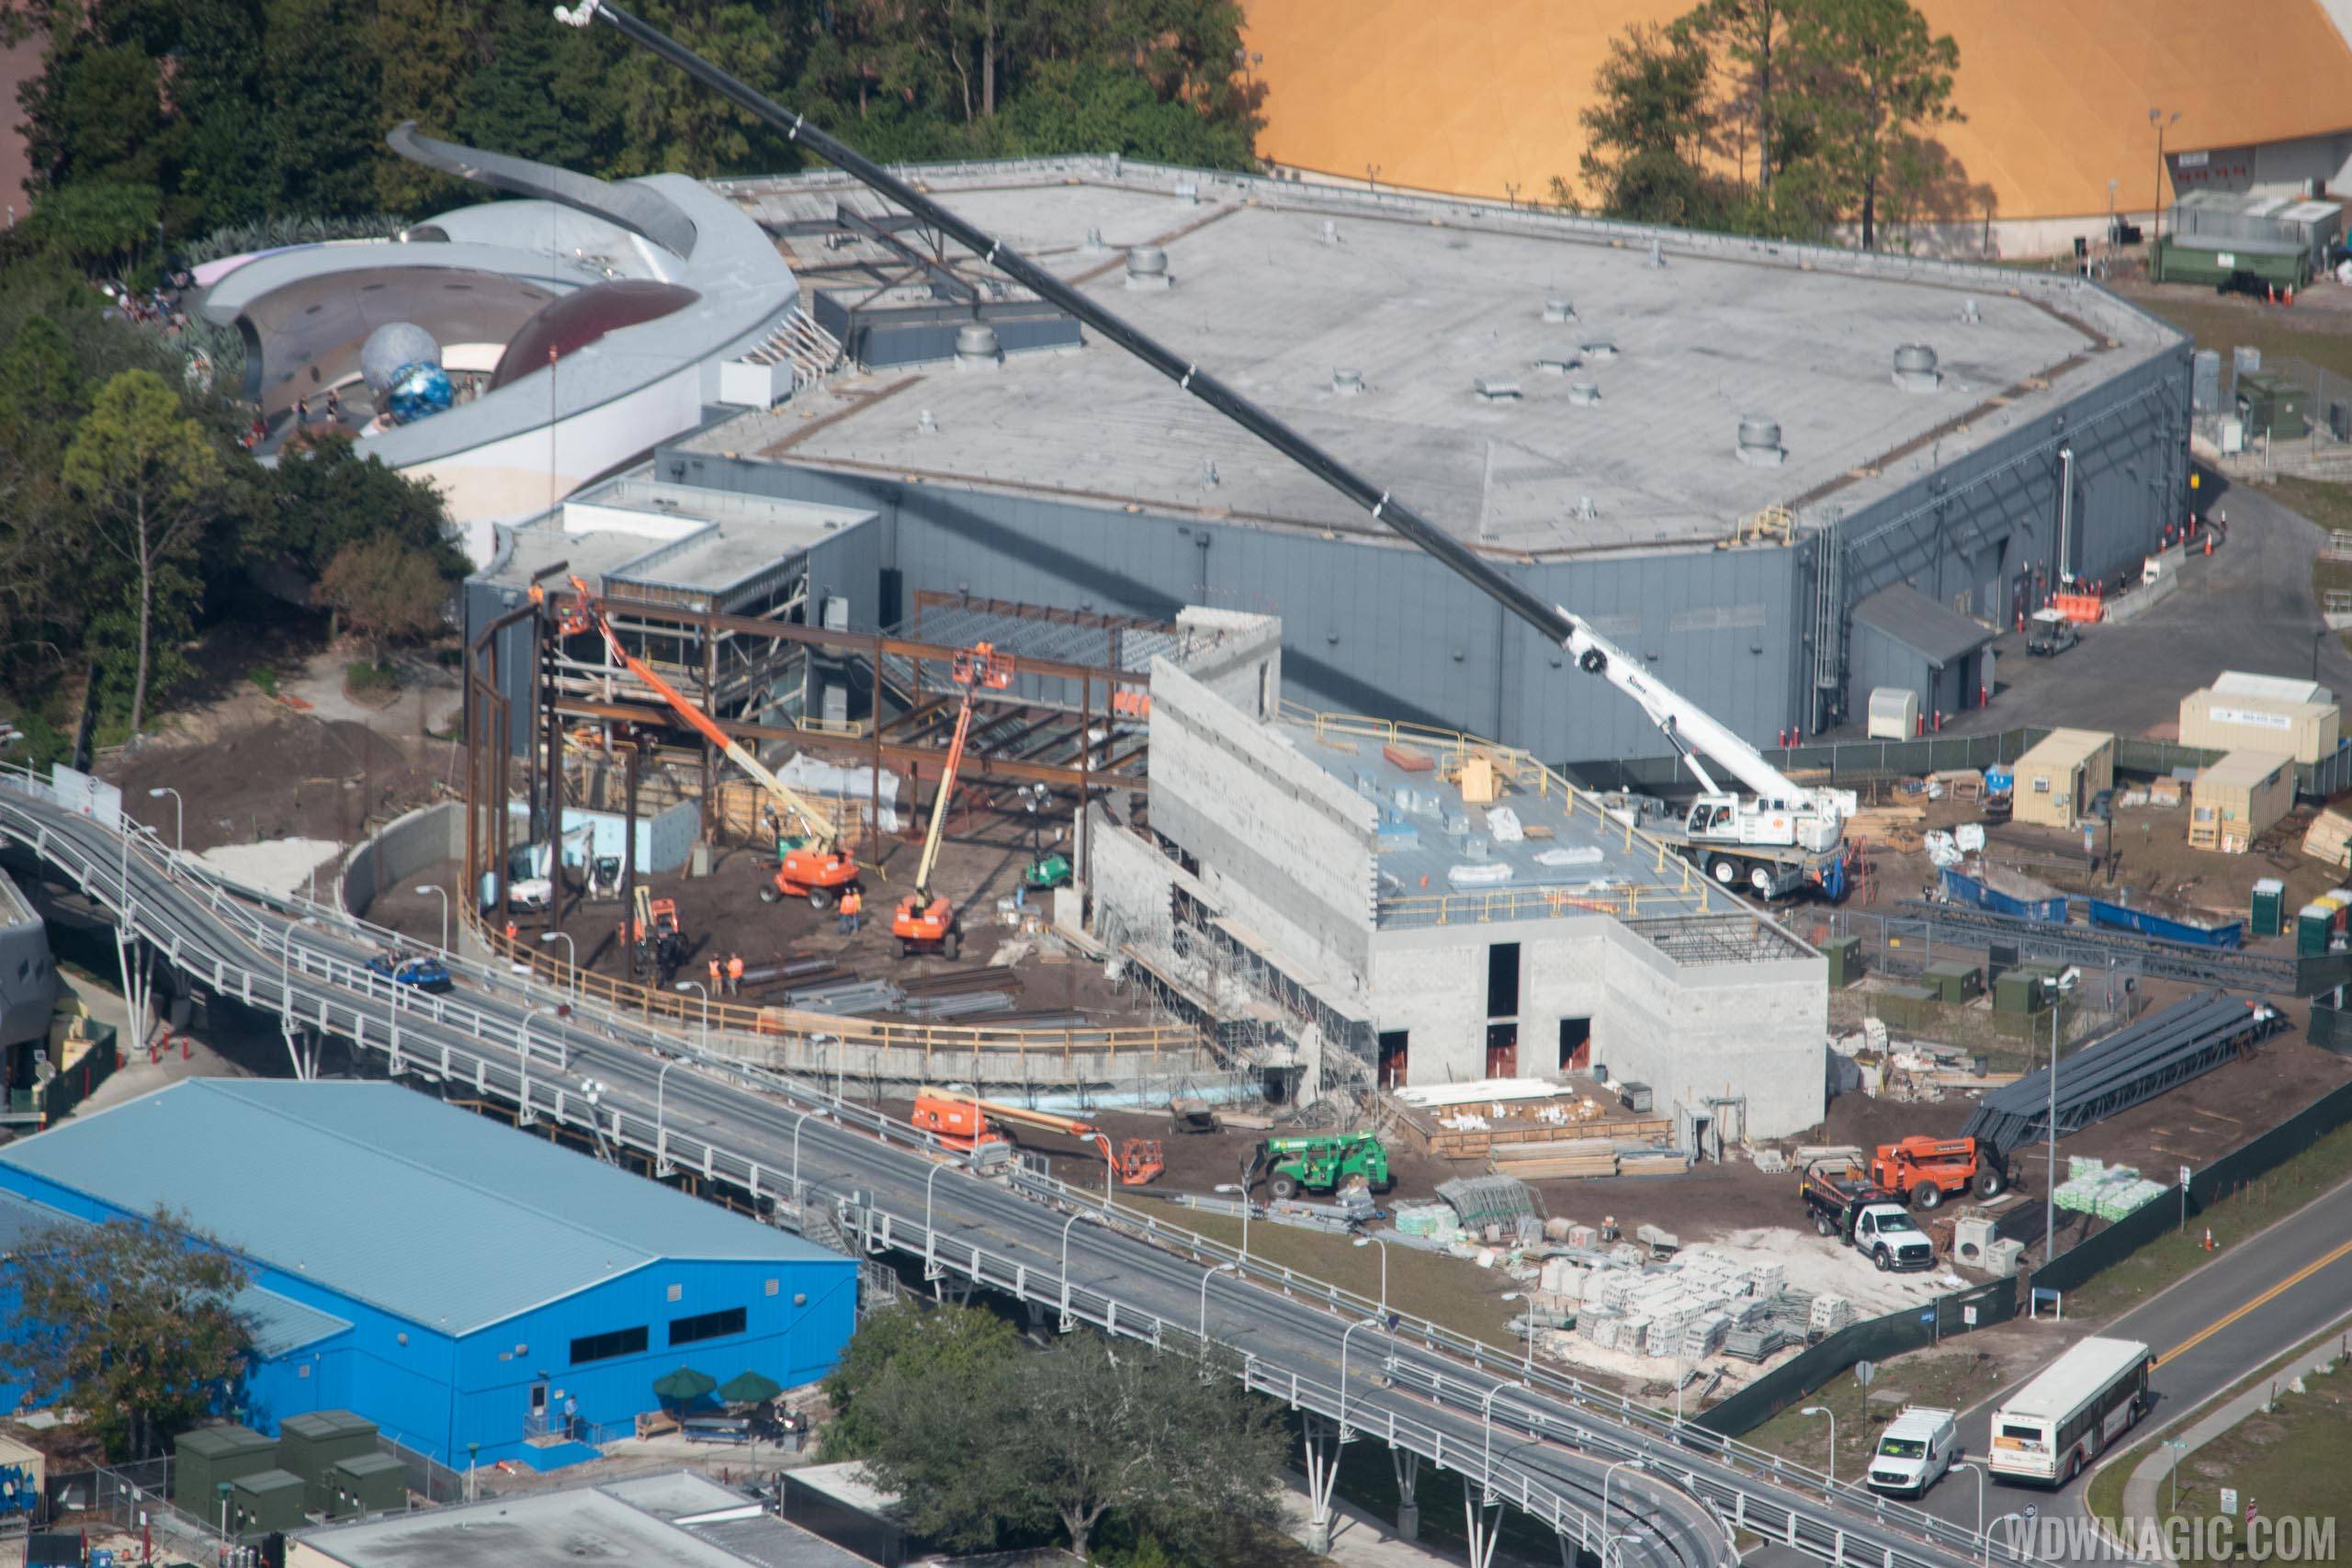 PHOTOS - Epcot's Space-themed restaurant construction update